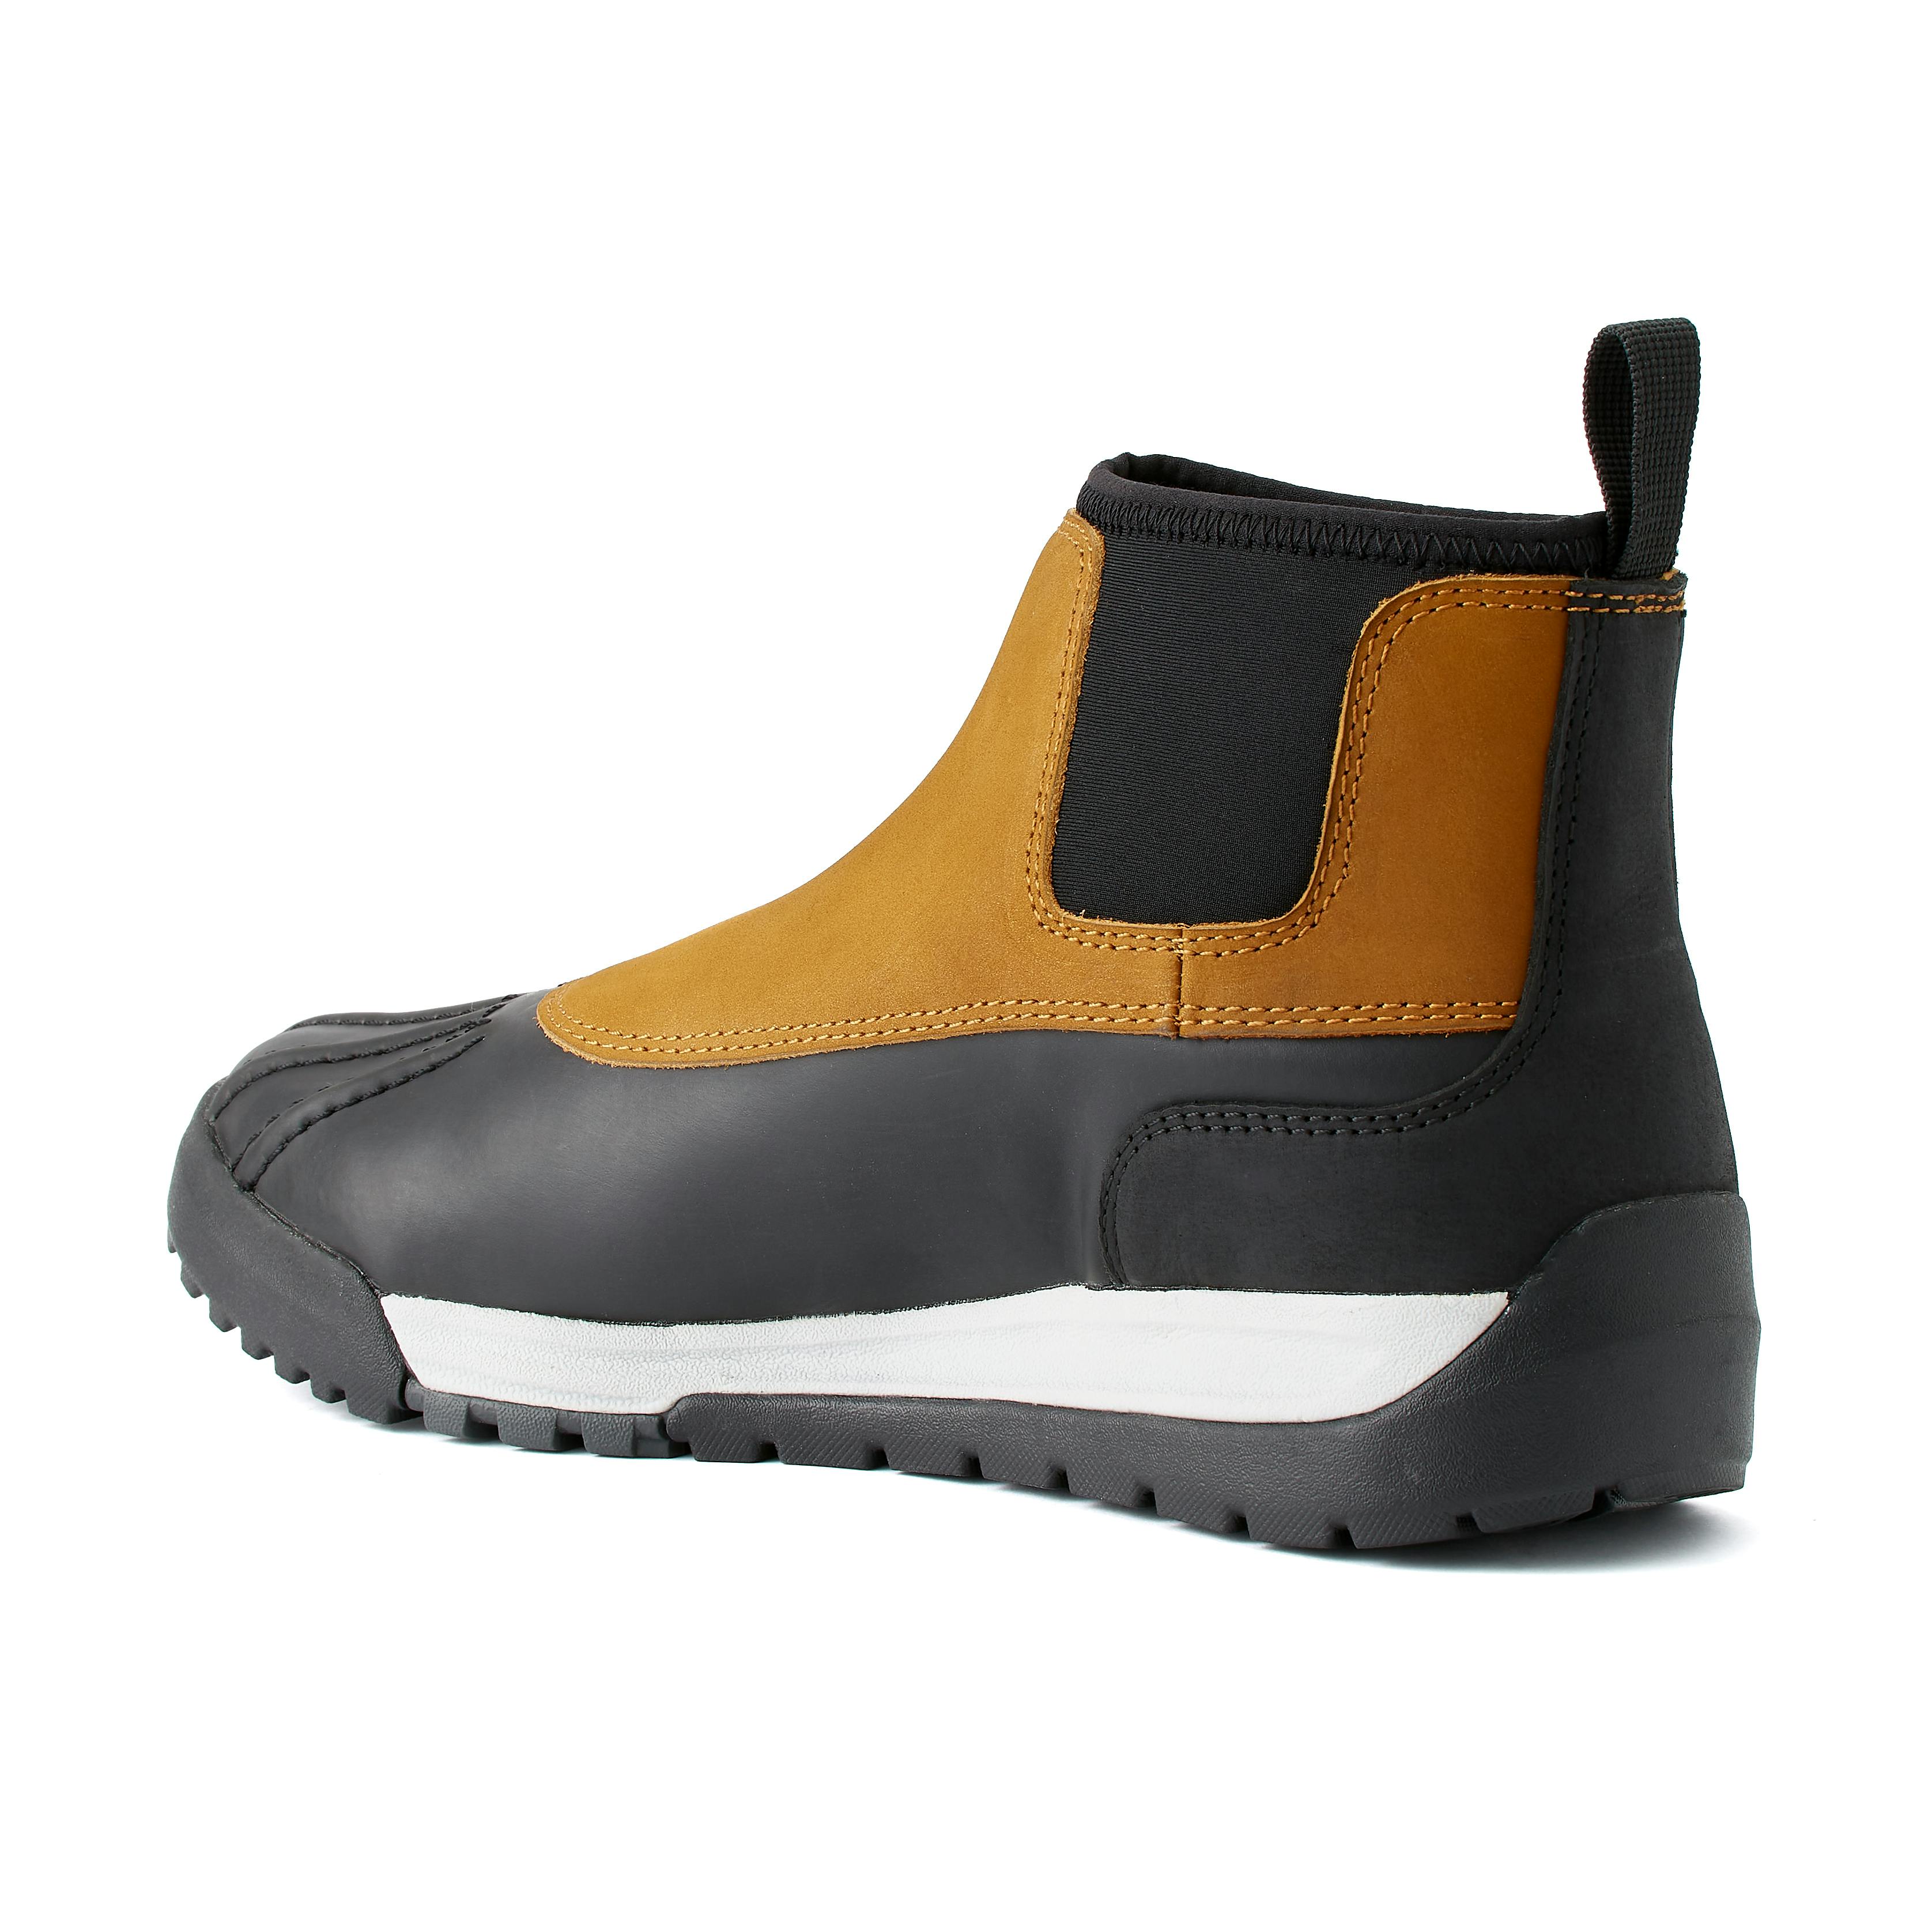 All-Weather Chore Boot